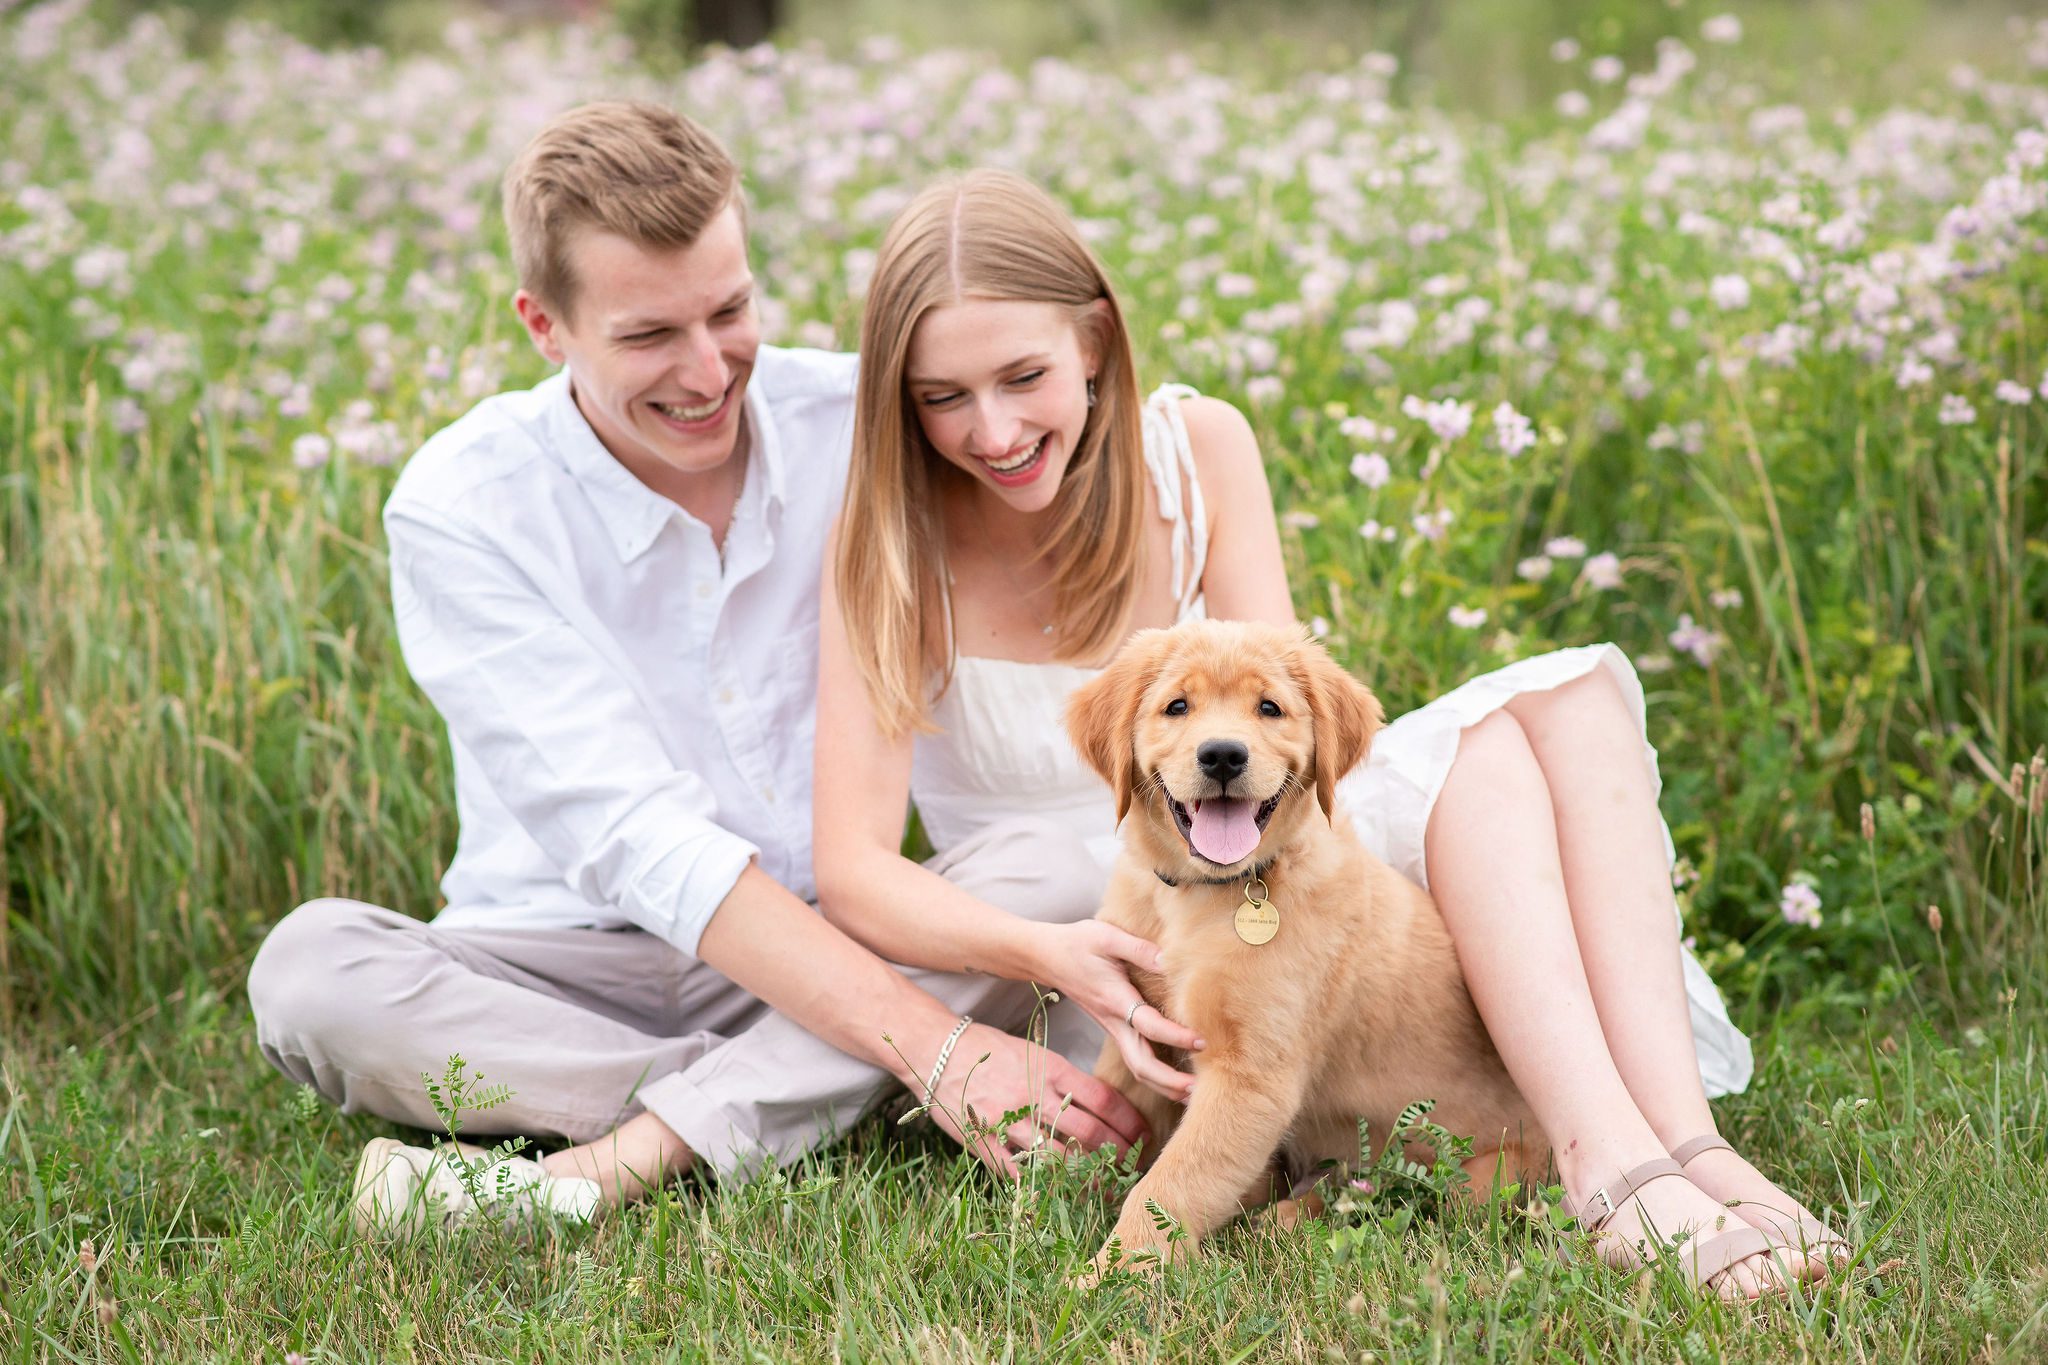 Couple sitting in grass smiling down at their 12 week old golden retriever puppy.